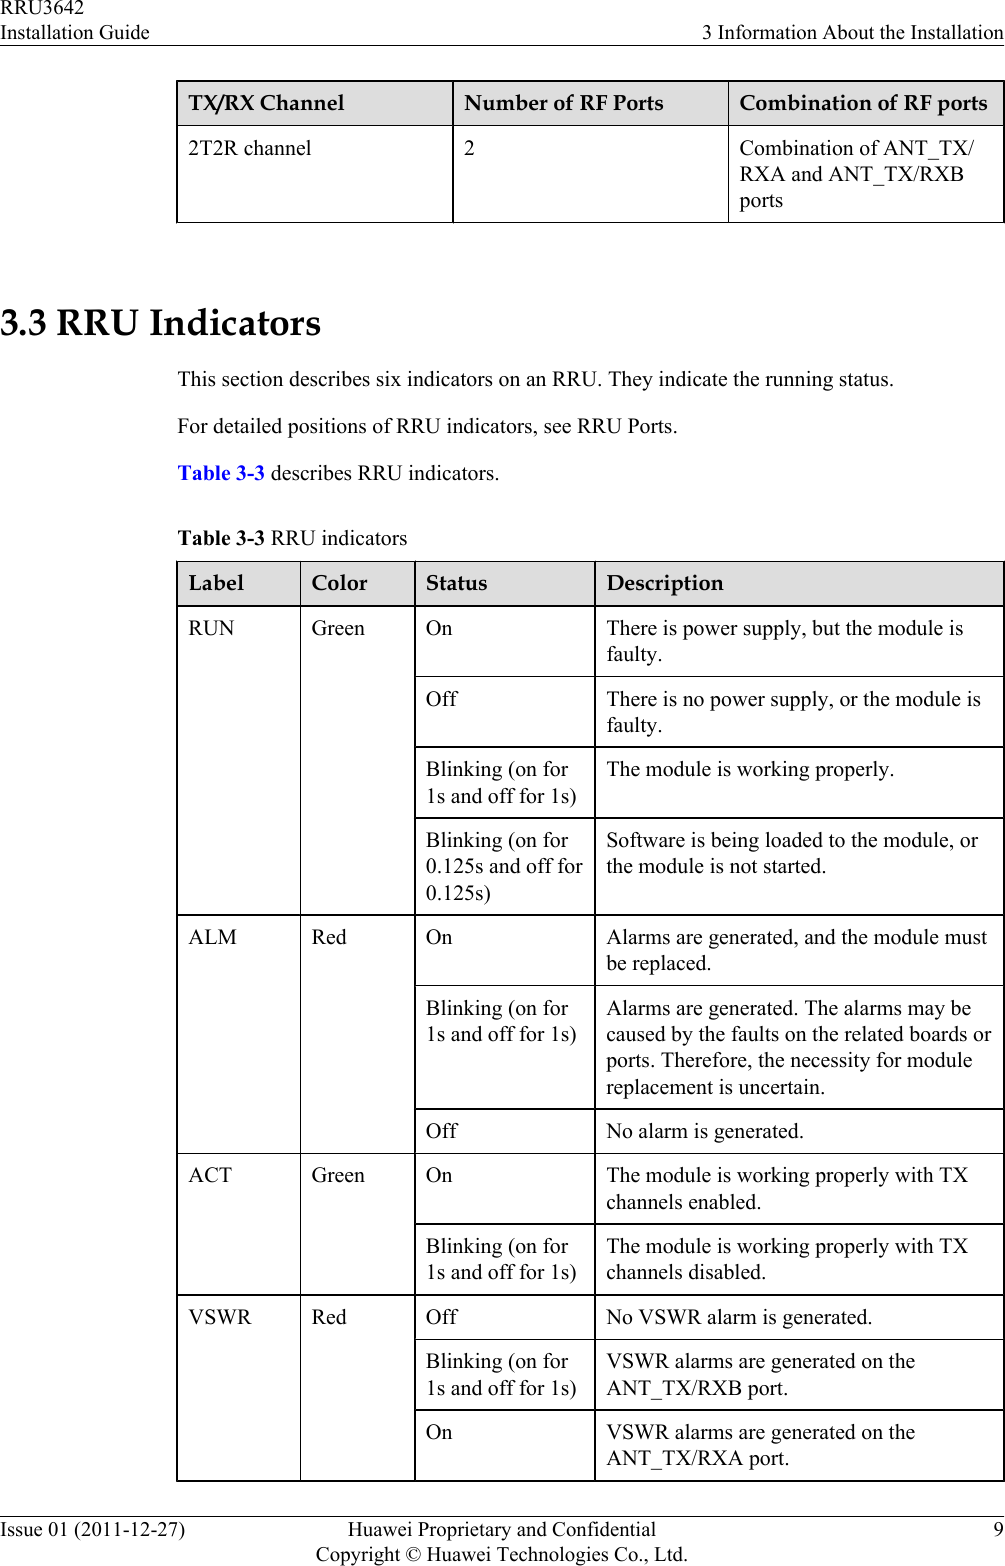 TX/RX Channel Number of RF Ports Combination of RF ports2T2R channel 2 Combination of ANT_TX/RXA and ANT_TX/RXBports 3.3 RRU IndicatorsThis section describes six indicators on an RRU. They indicate the running status.For detailed positions of RRU indicators, see RRU Ports.Table 3-3 describes RRU indicators.Table 3-3 RRU indicatorsLabel Color Status DescriptionRUN Green On There is power supply, but the module isfaulty.Off There is no power supply, or the module isfaulty.Blinking (on for1s and off for 1s)The module is working properly.Blinking (on for0.125s and off for0.125s)Software is being loaded to the module, orthe module is not started.ALM Red On Alarms are generated, and the module mustbe replaced.Blinking (on for1s and off for 1s)Alarms are generated. The alarms may becaused by the faults on the related boards orports. Therefore, the necessity for modulereplacement is uncertain.Off No alarm is generated.ACT Green On The module is working properly with TXchannels enabled.Blinking (on for1s and off for 1s)The module is working properly with TXchannels disabled.VSWR Red Off No VSWR alarm is generated.Blinking (on for1s and off for 1s)VSWR alarms are generated on theANT_TX/RXB port.On VSWR alarms are generated on theANT_TX/RXA port.RRU3642Installation Guide 3 Information About the InstallationIssue 01 (2011-12-27) Huawei Proprietary and ConfidentialCopyright © Huawei Technologies Co., Ltd.9